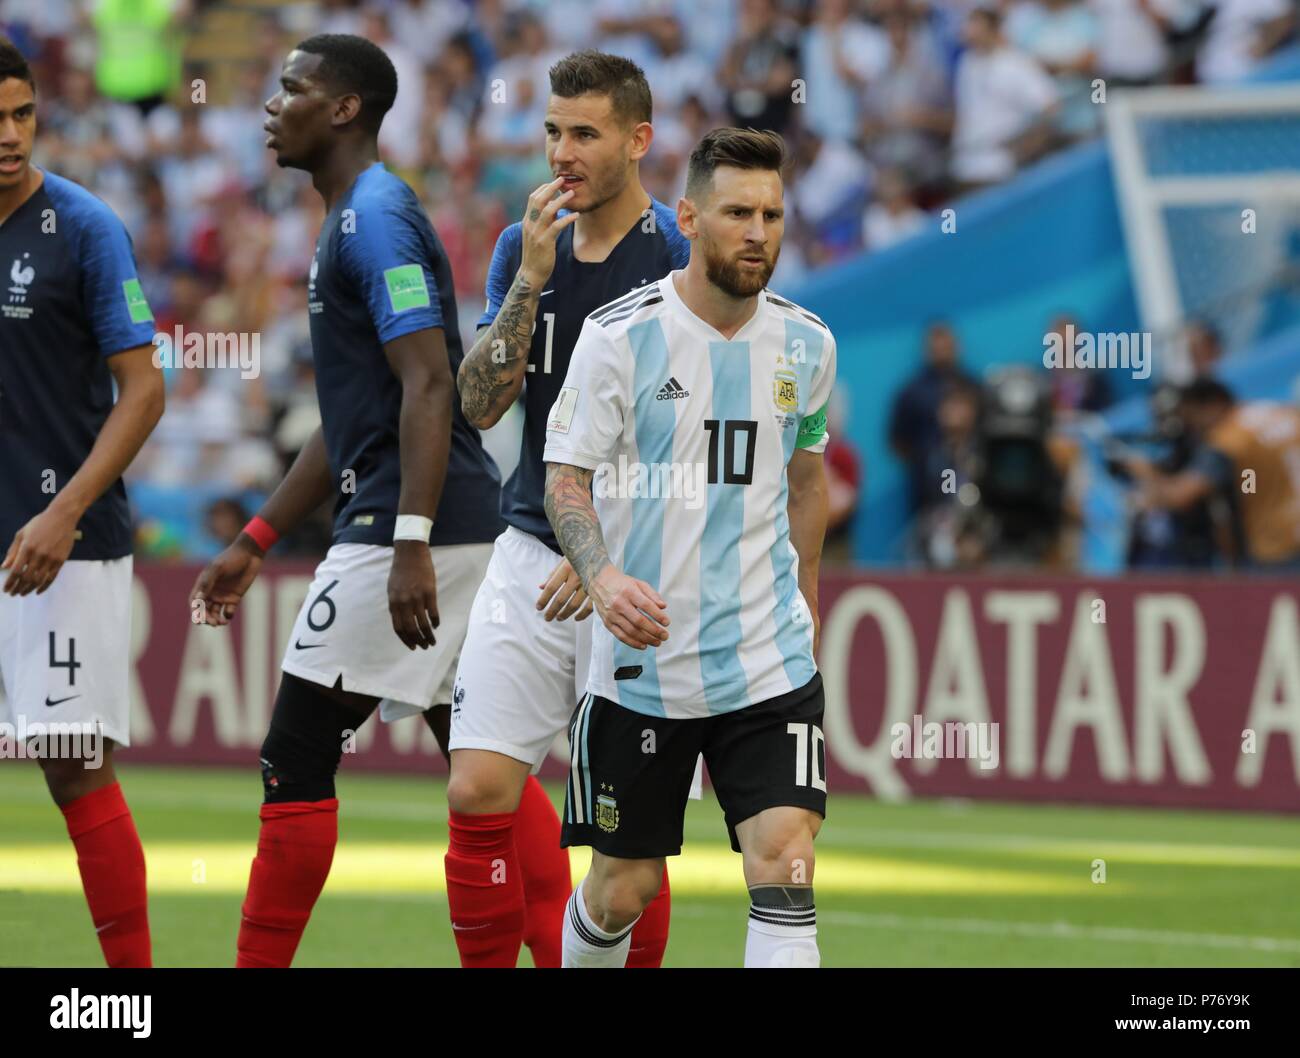 June 30, 2018. - Russia, Kazan. - 2018 FIFA World Cup round of 16 match. France v Argentina, 4:3. In picture: Argentina's player Lionel Messi (10) and France's players Raphael Varane (4), Paul Pogba (6), Lucas Hernandez (21). Stock Photo